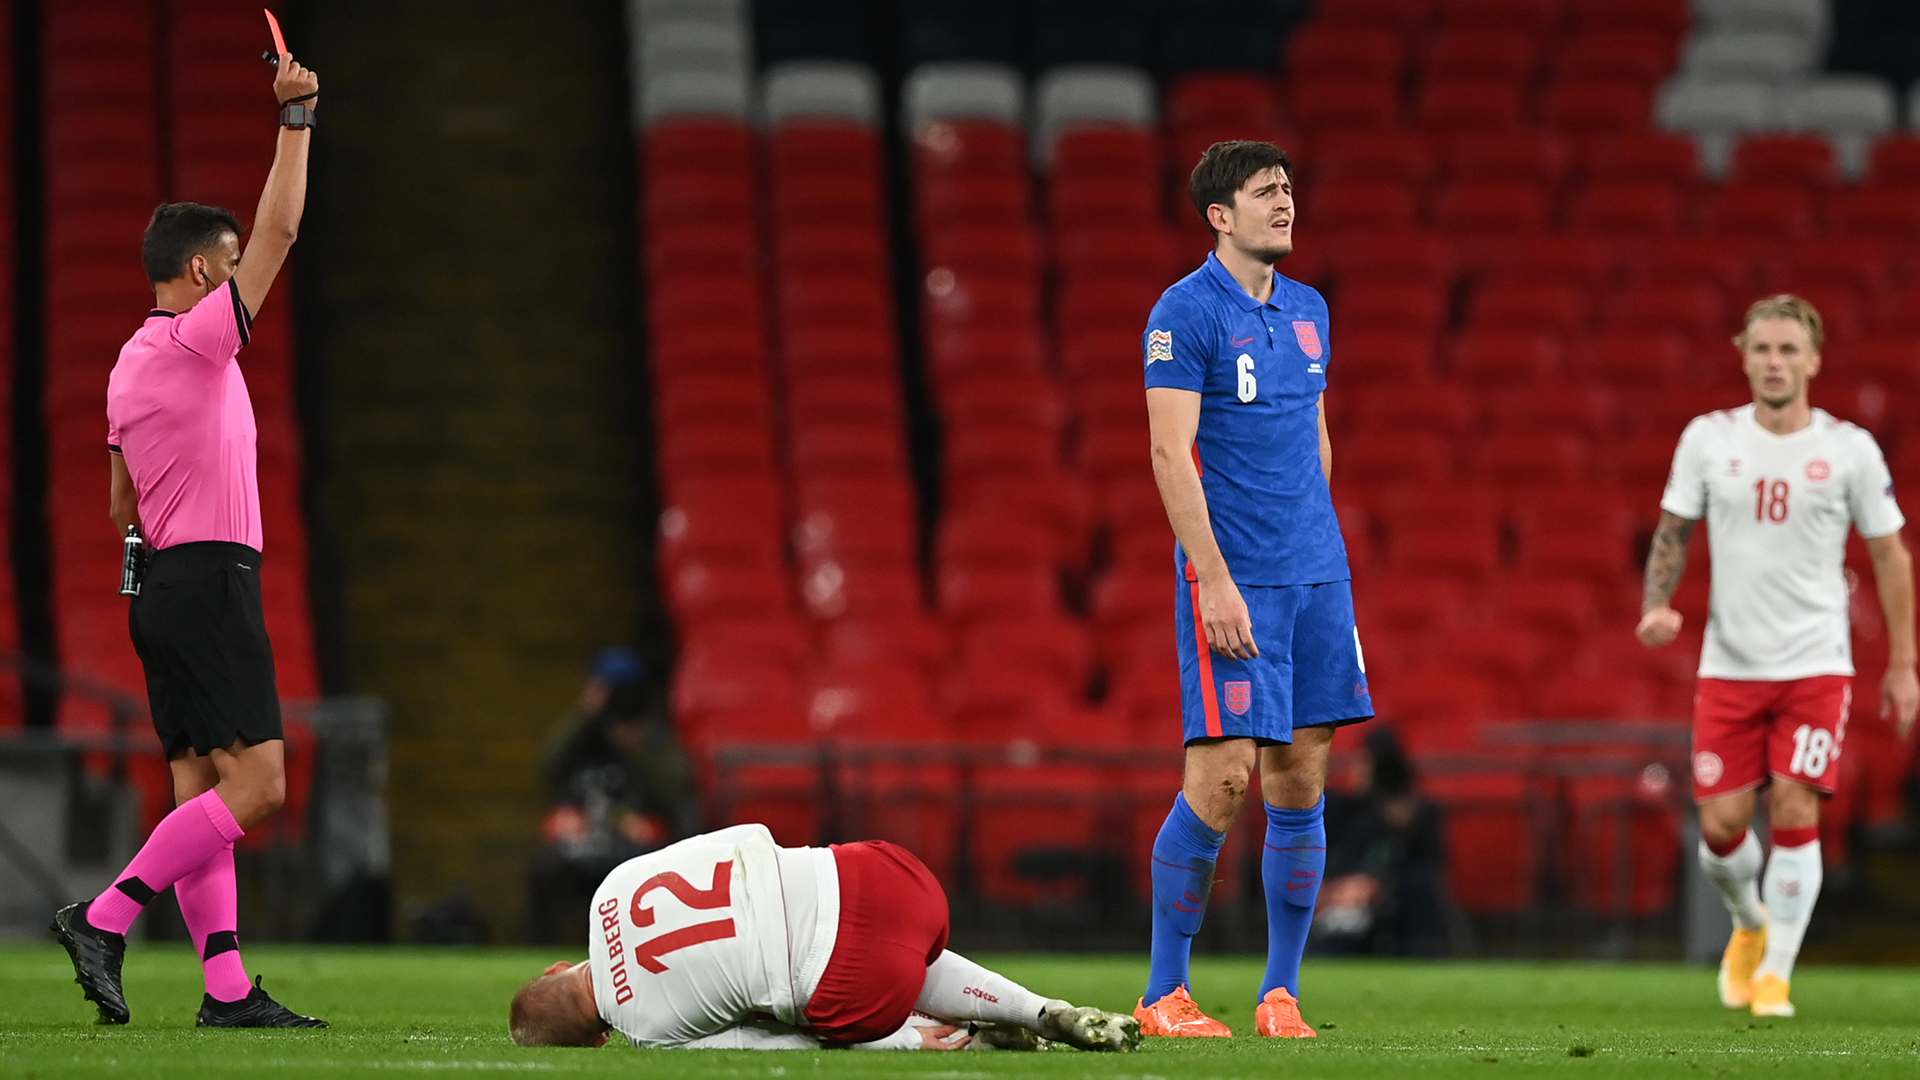 'There's a lot going on in Maguire's life and we sometimes forget that' - Redknapp defends under-fire England & Man Utd man